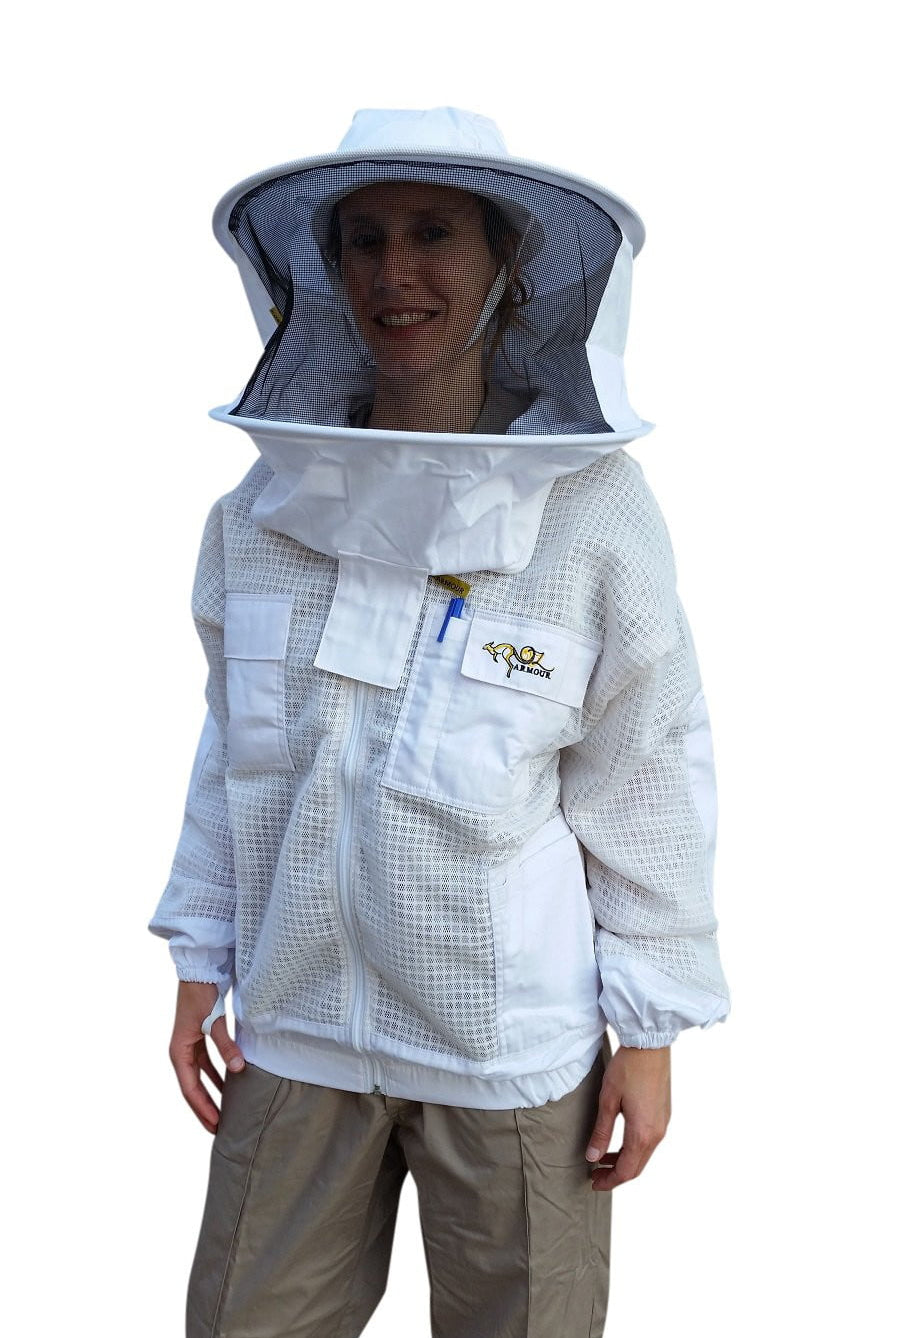  Mesh Ventilated Beekeeping Jacket With Round Hat Veil